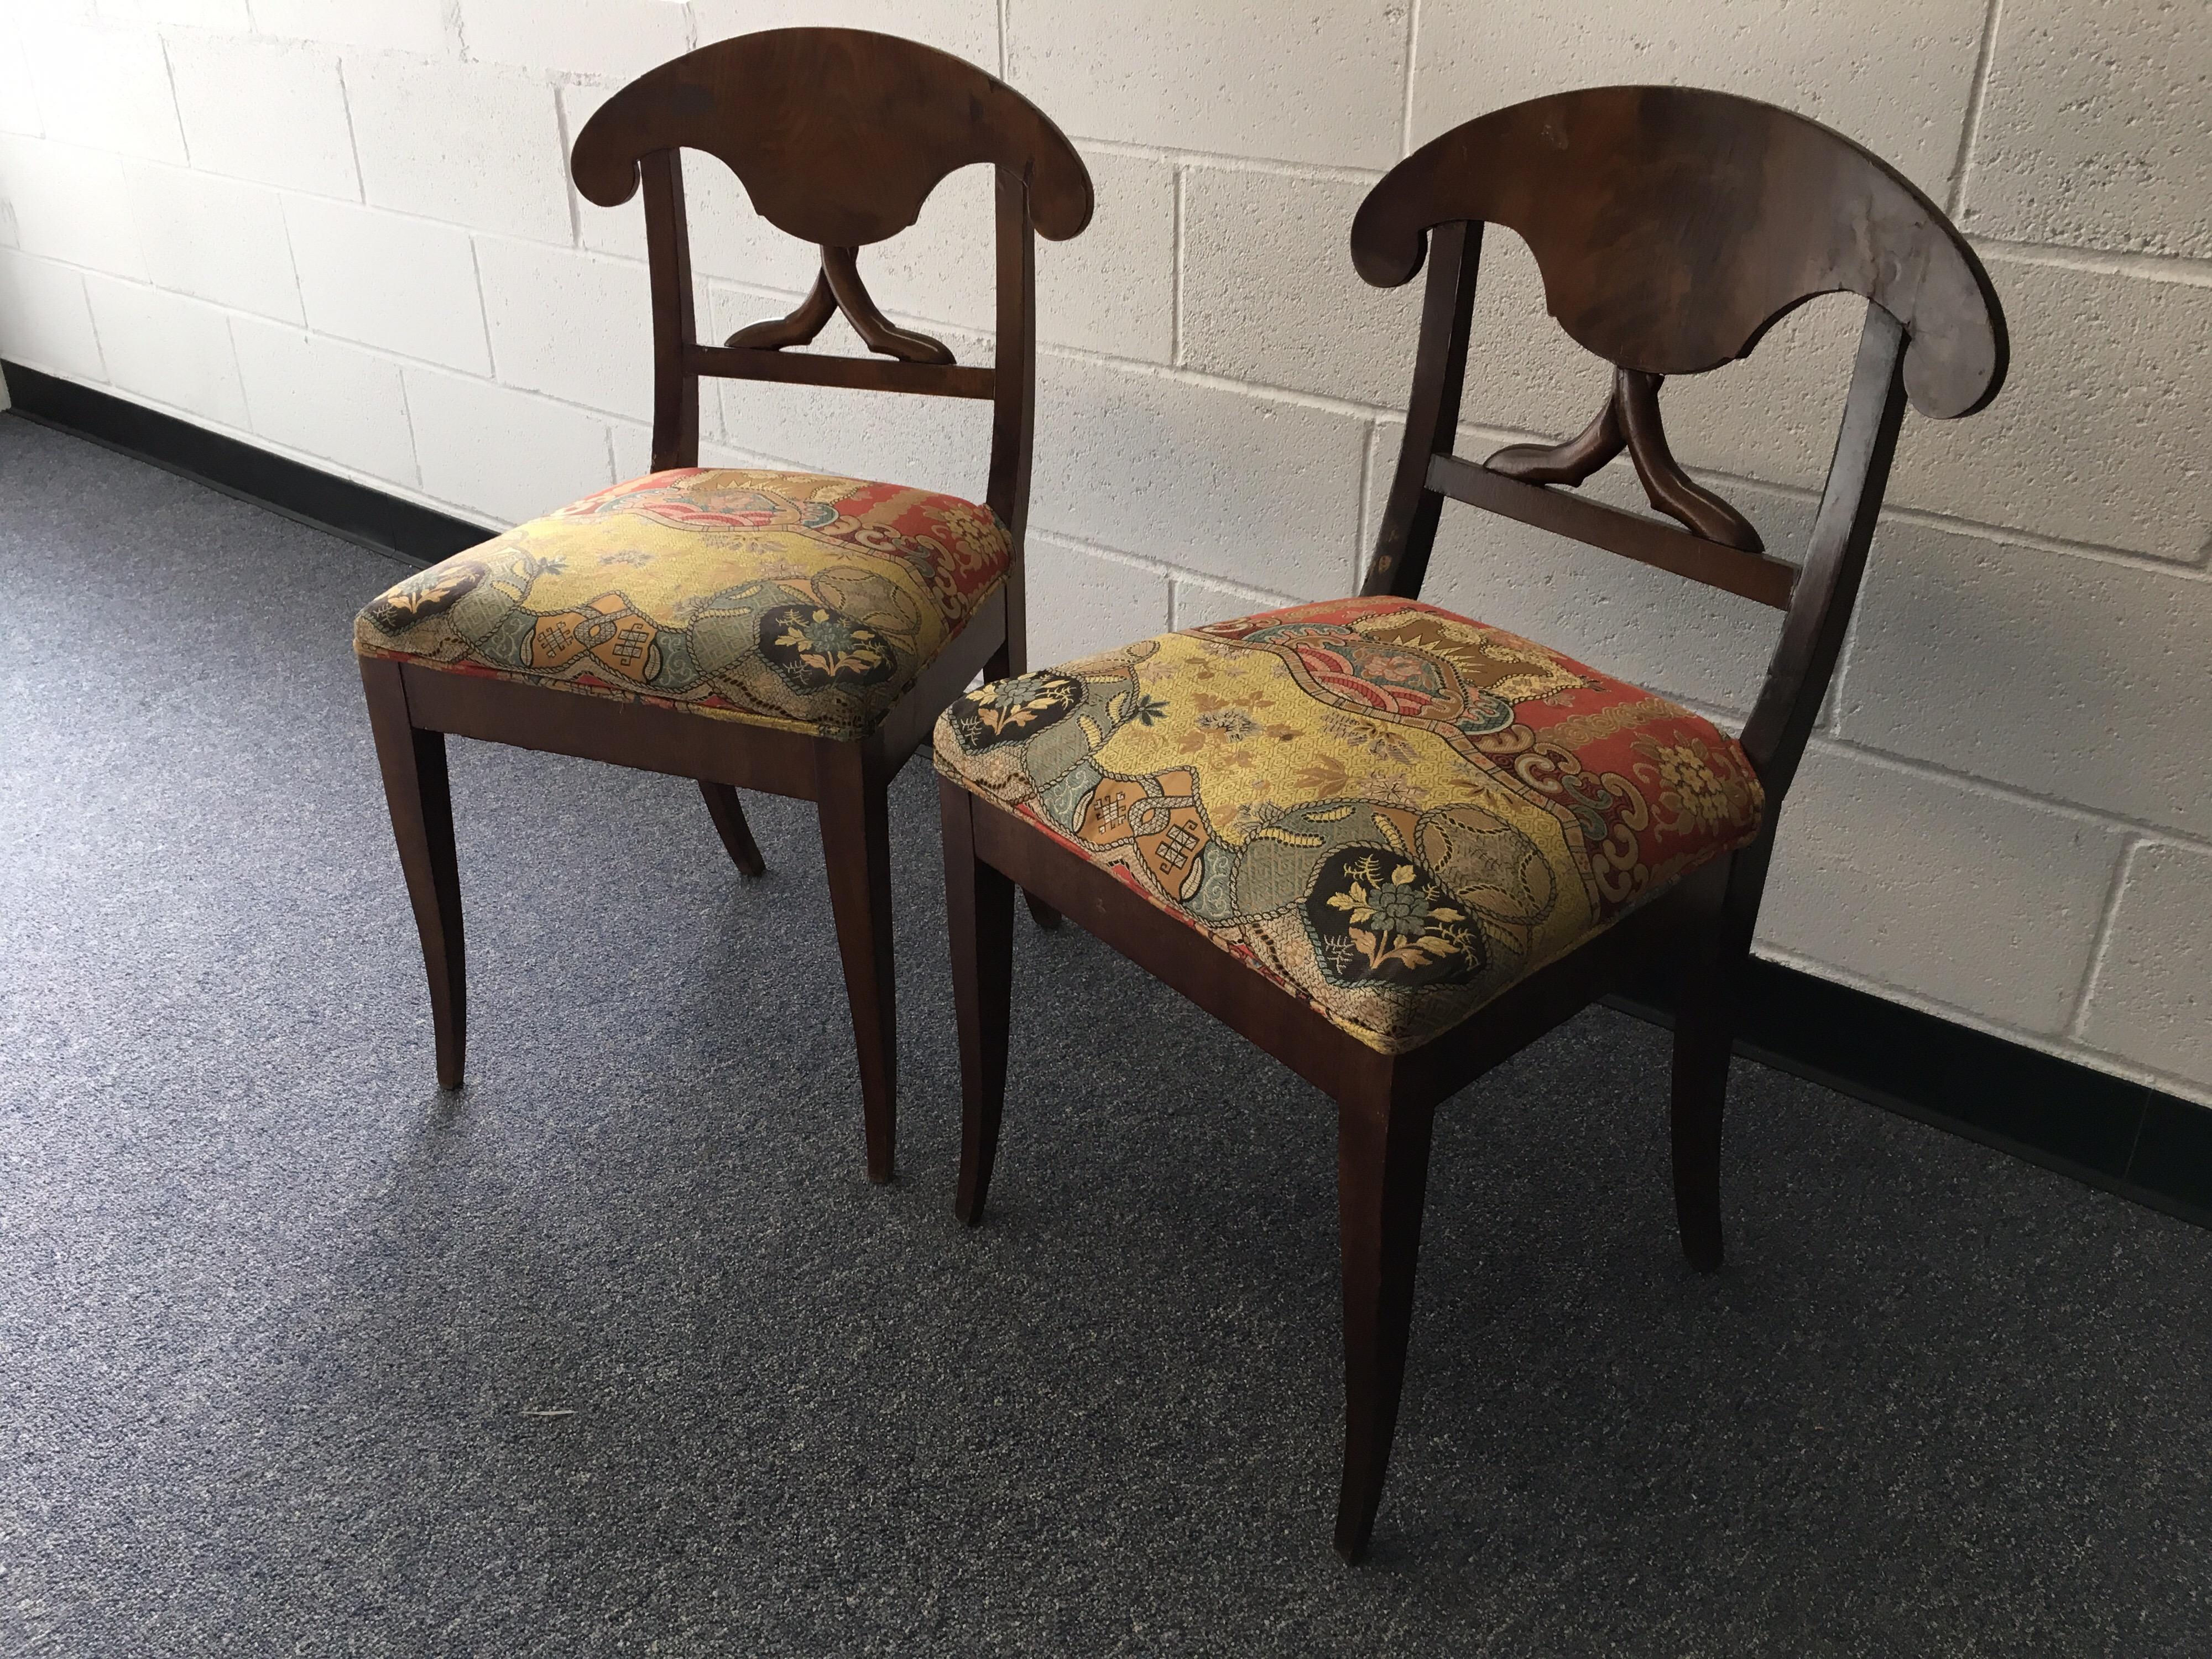 Pair of late 19th century Swedish Biedermeier side chairs with silk fabric. Beautiful silk fabric in great condition. Visible repairs to the seat back. Structurally sound. Some scratches to the finish.